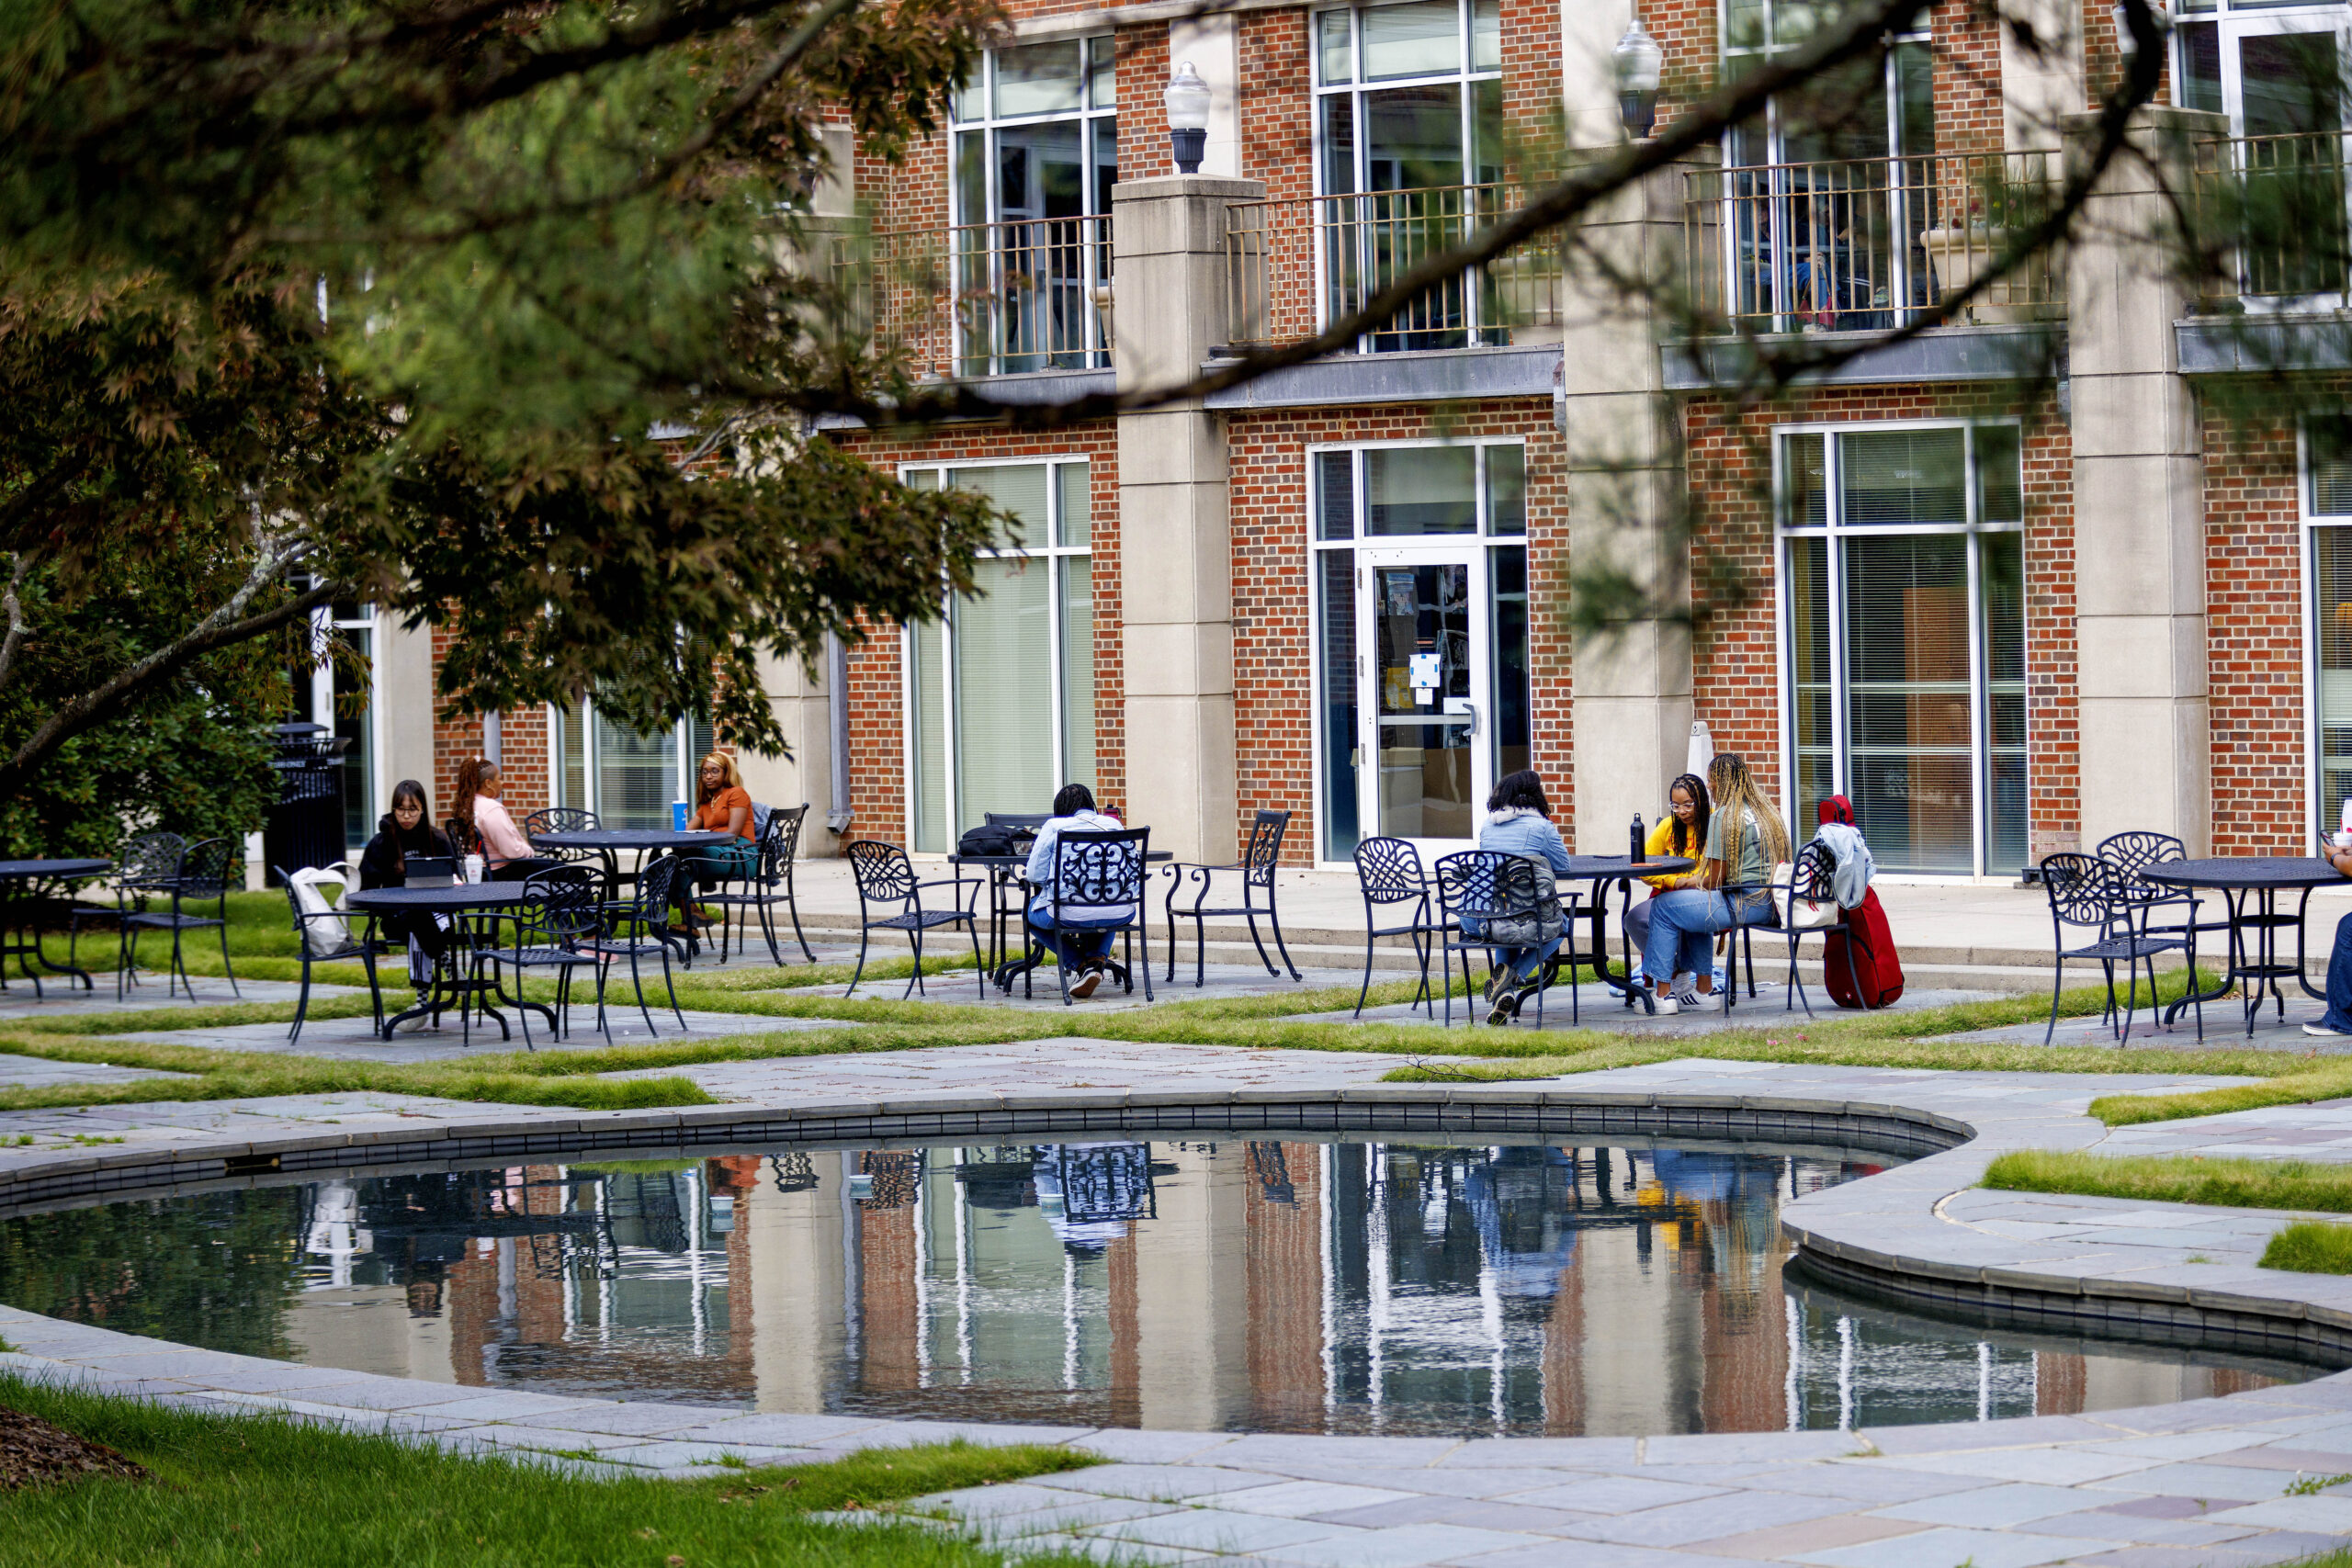 Students enjoy a mid afternoon break on Wednesday, finding a quiet place at the reflecting pool and fountain behind the Alumni House.